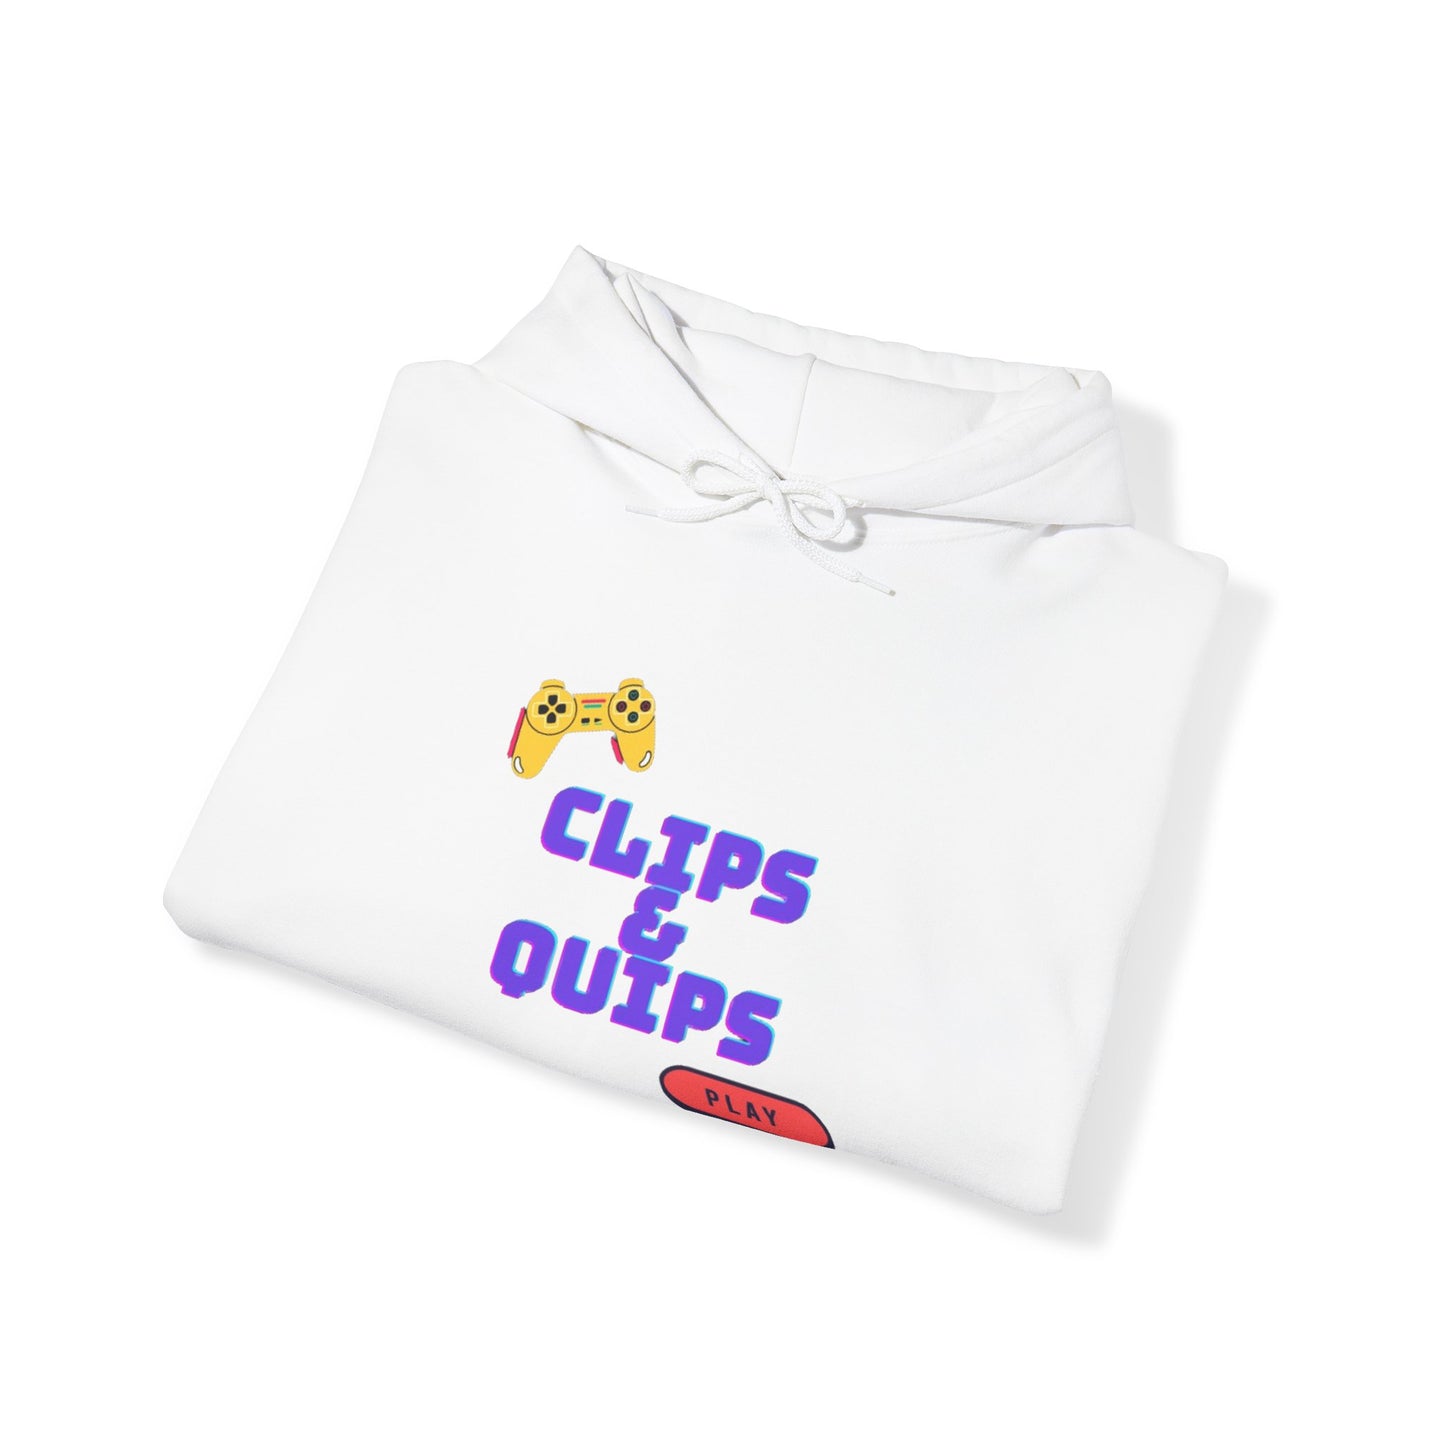 Classic Clips and Quips Hooded Sweatshirt